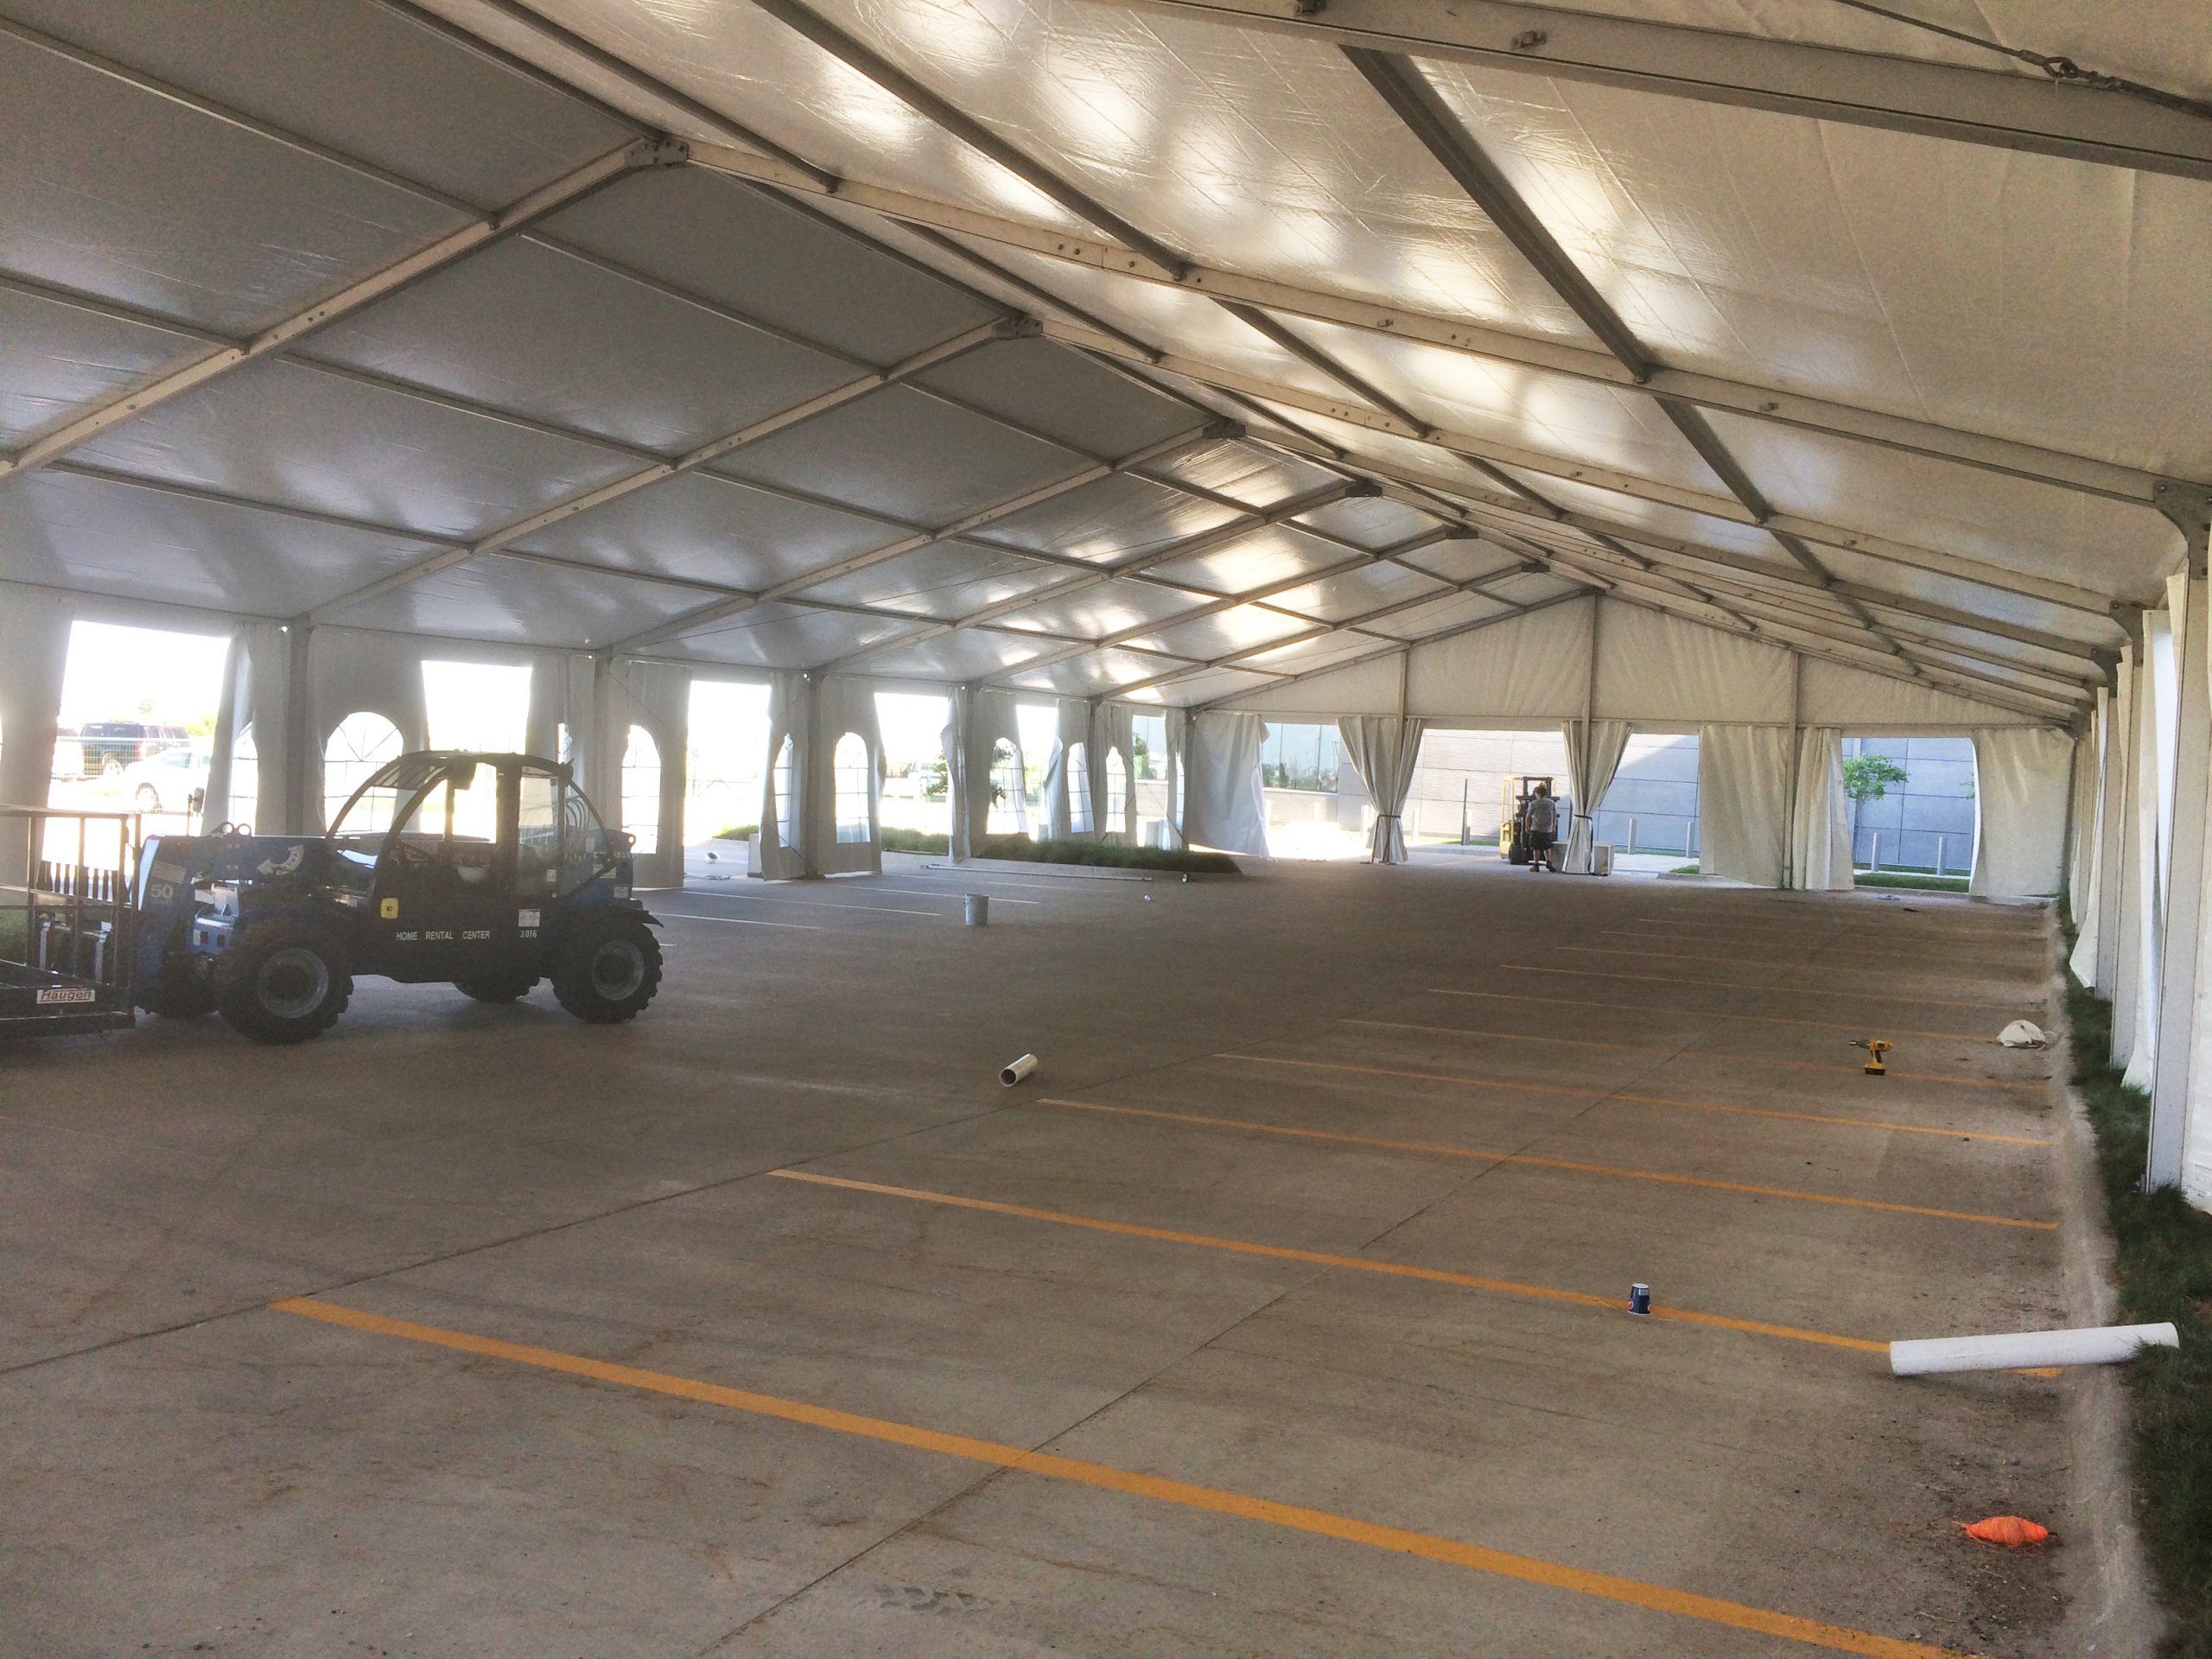 Under the 60' x 131' Clearspan tent for the grand opening event of Brownells location in Grinnell, Iowa